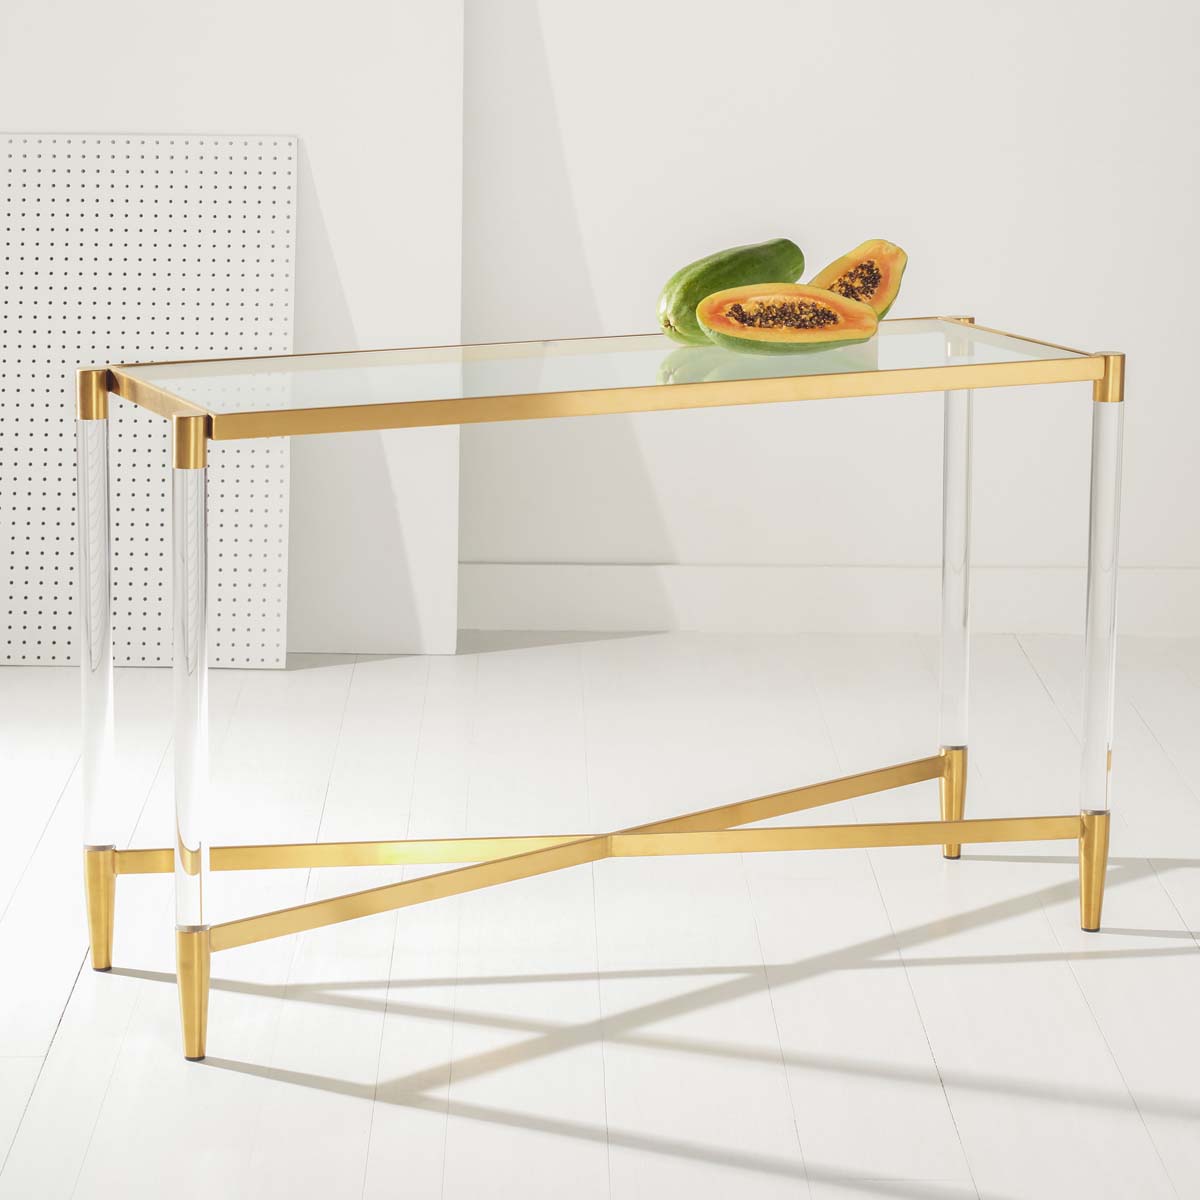 Safavieh Couture Kyla Acrylic Console Table